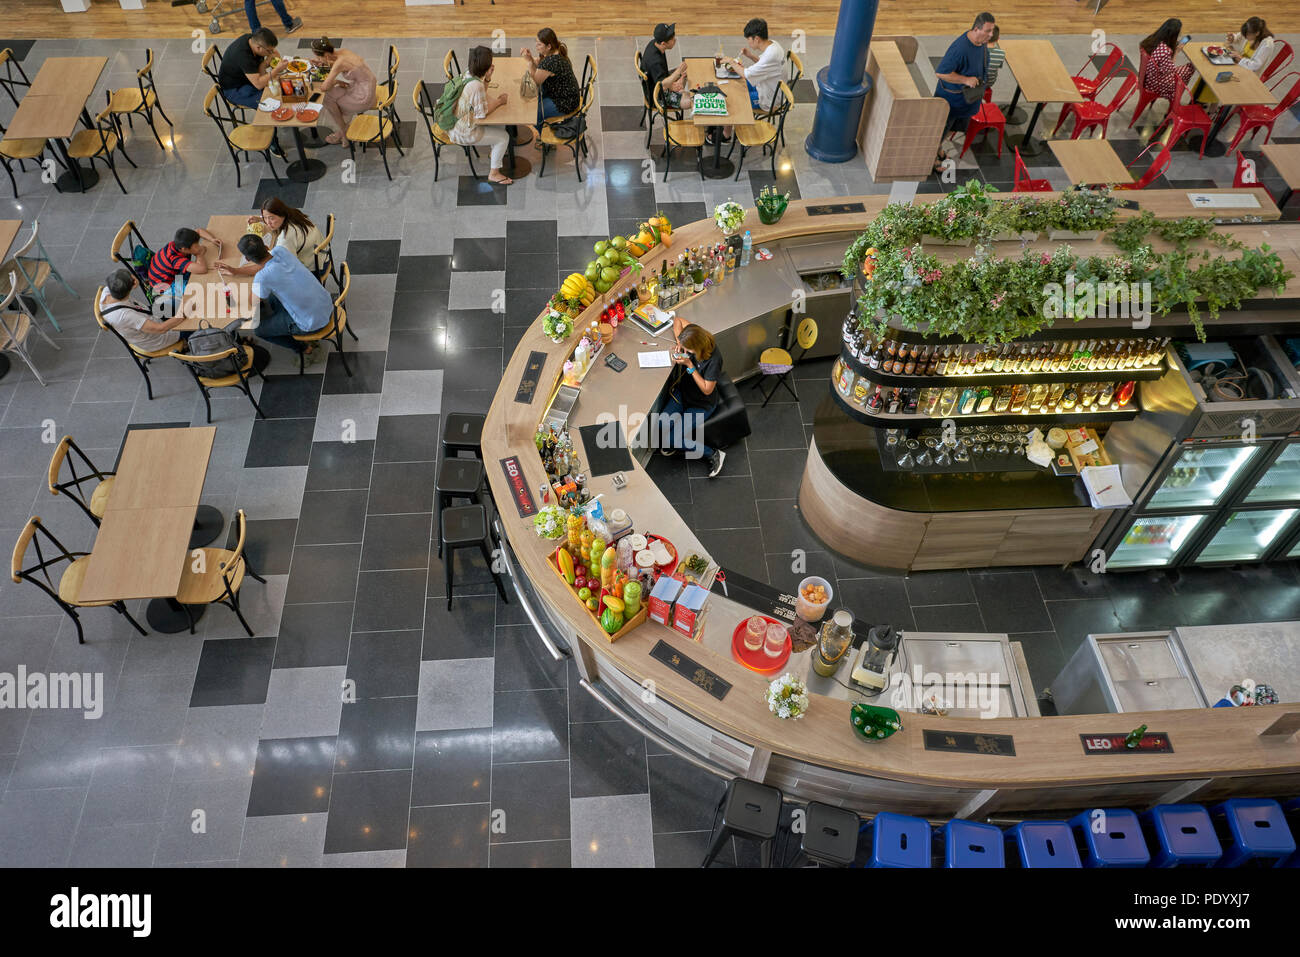 Overhead view of the restaurant dining area in a Thailand shopping mall. Diners from above. Southeast Asia. Stock Photo